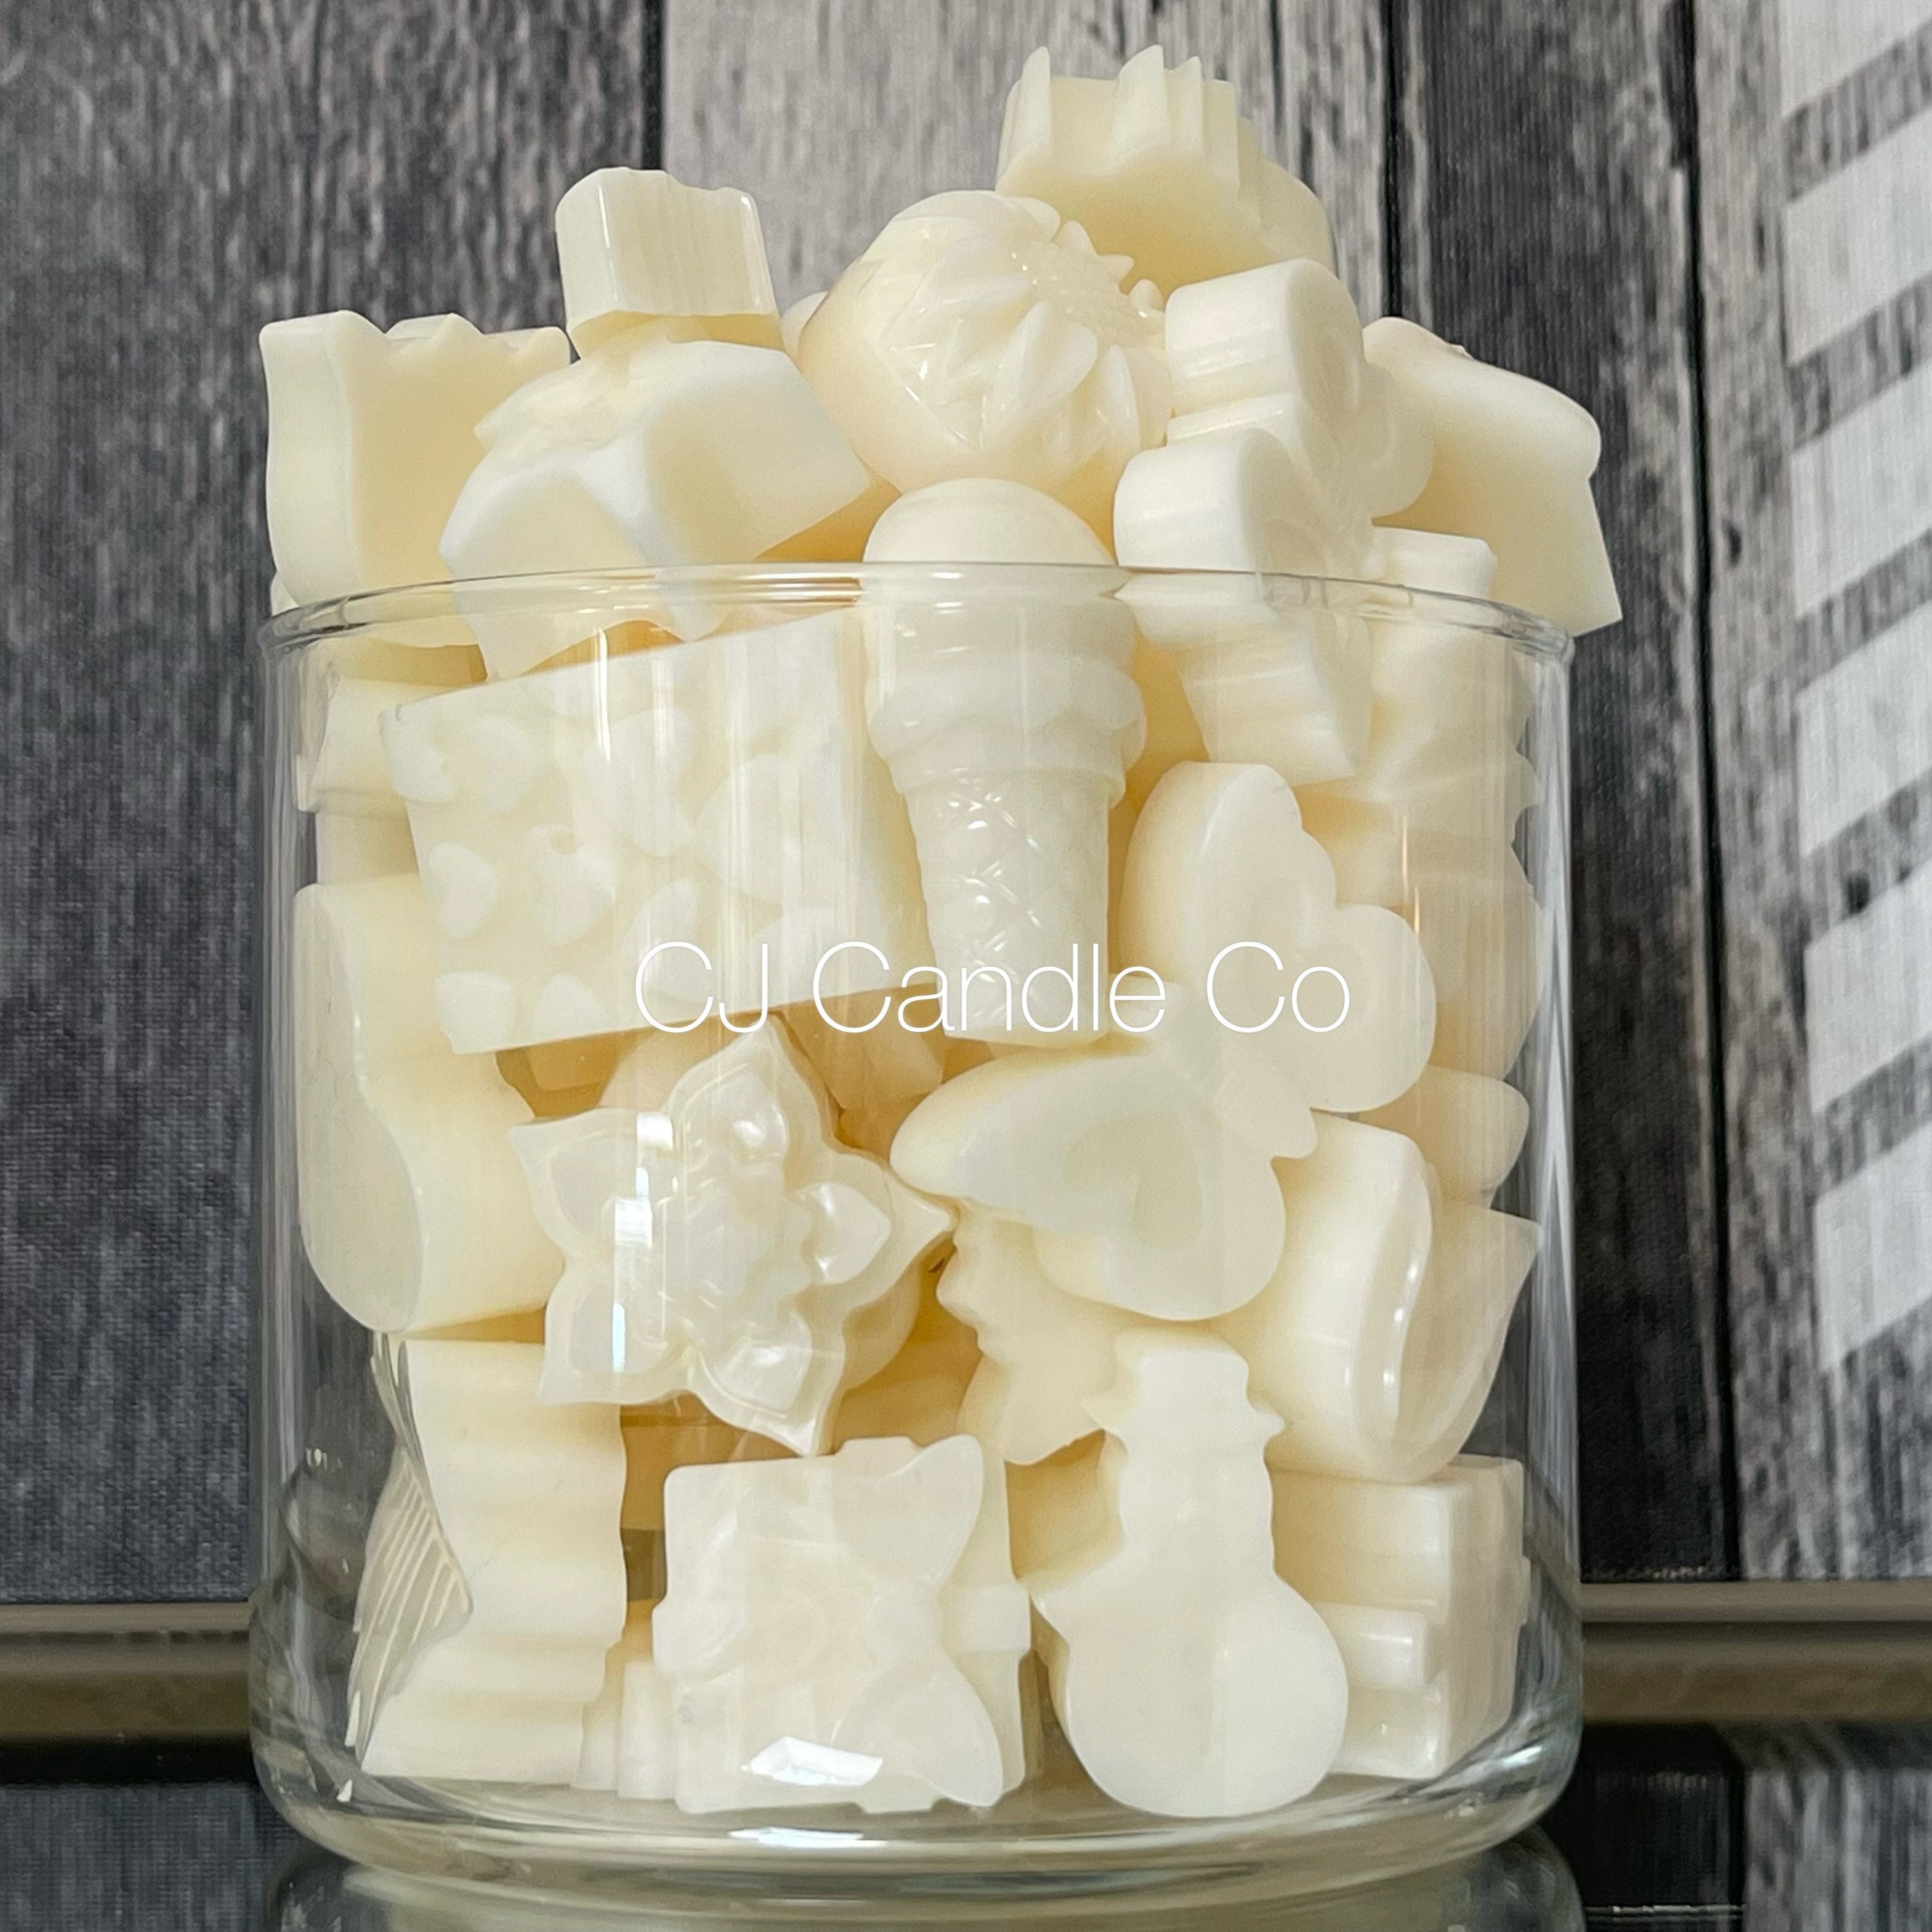 6Pk Scented Wax Melts White Woods - Set of 4 - On Sale - Bed Bath & Beyond  - 38431986